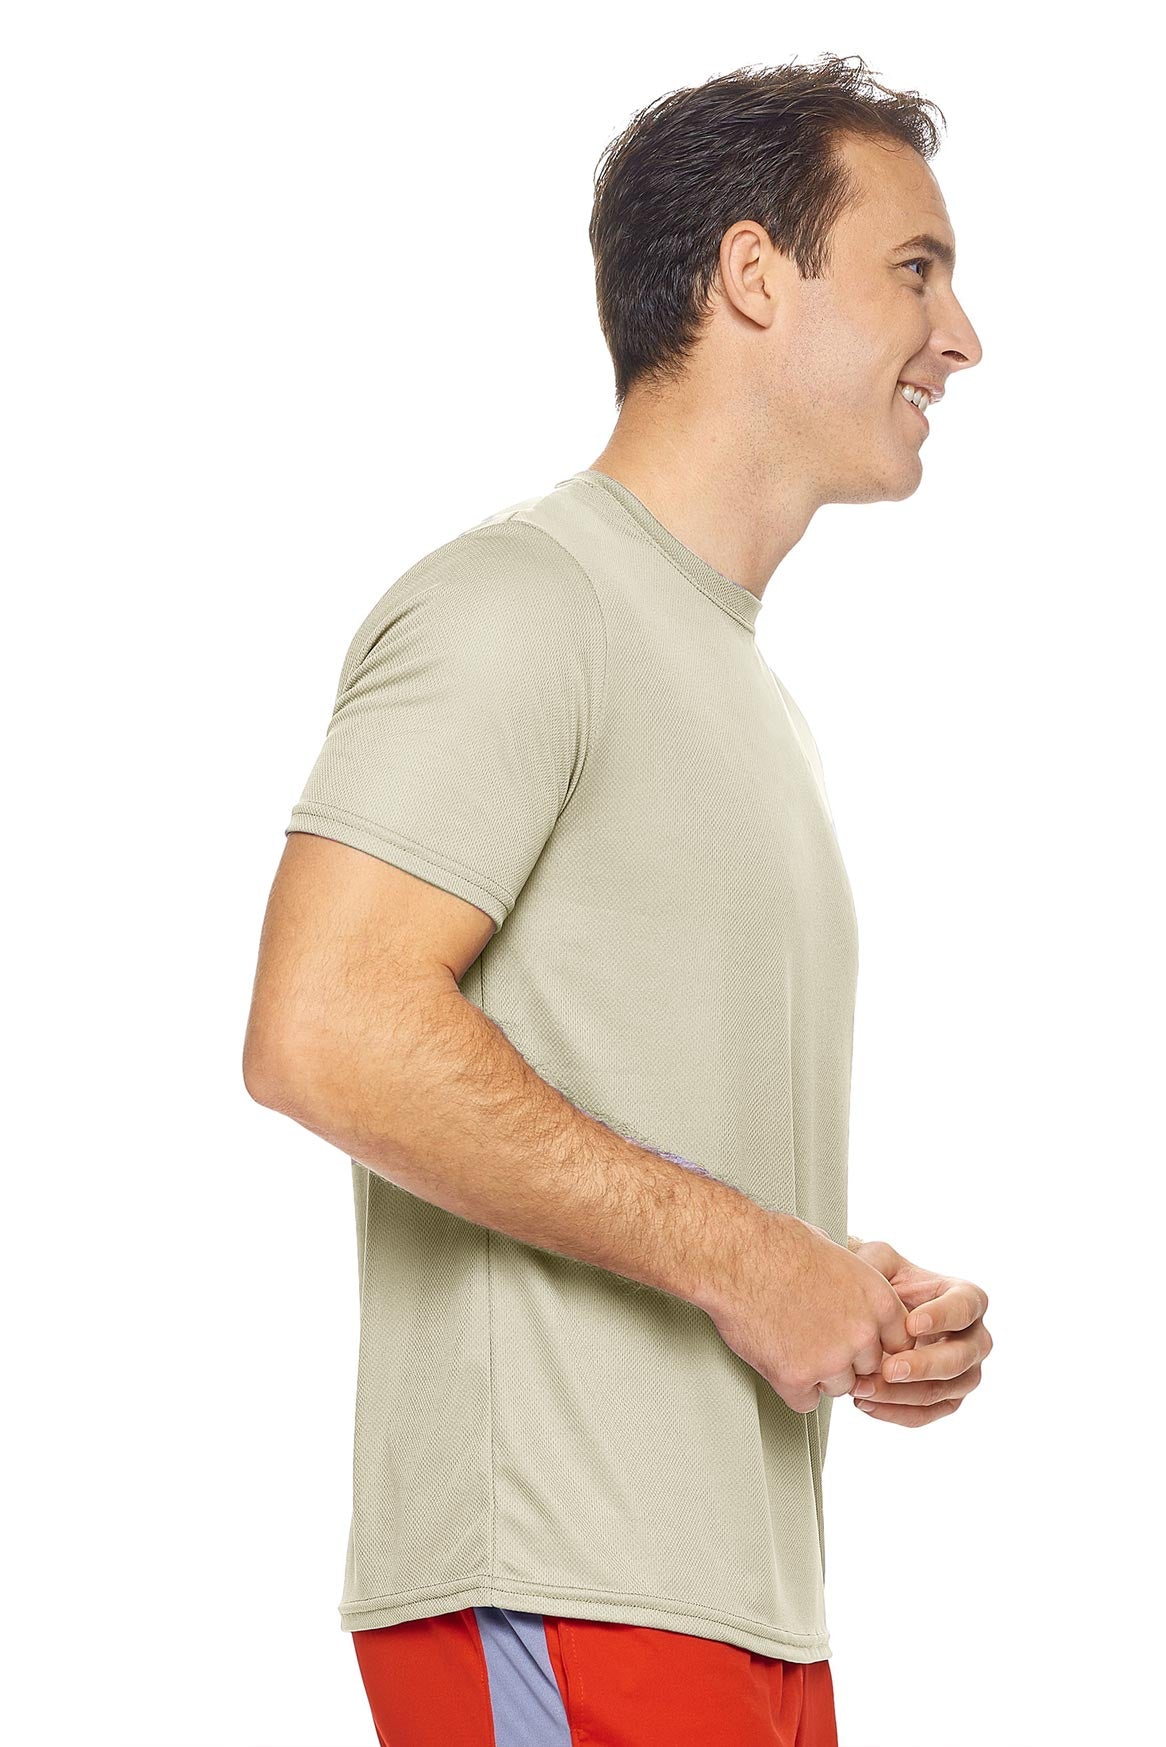 Expert Brand Retail Sportswear Men's Oxymesh Tec Tee Made in USA activewear sand image 2#color_sand